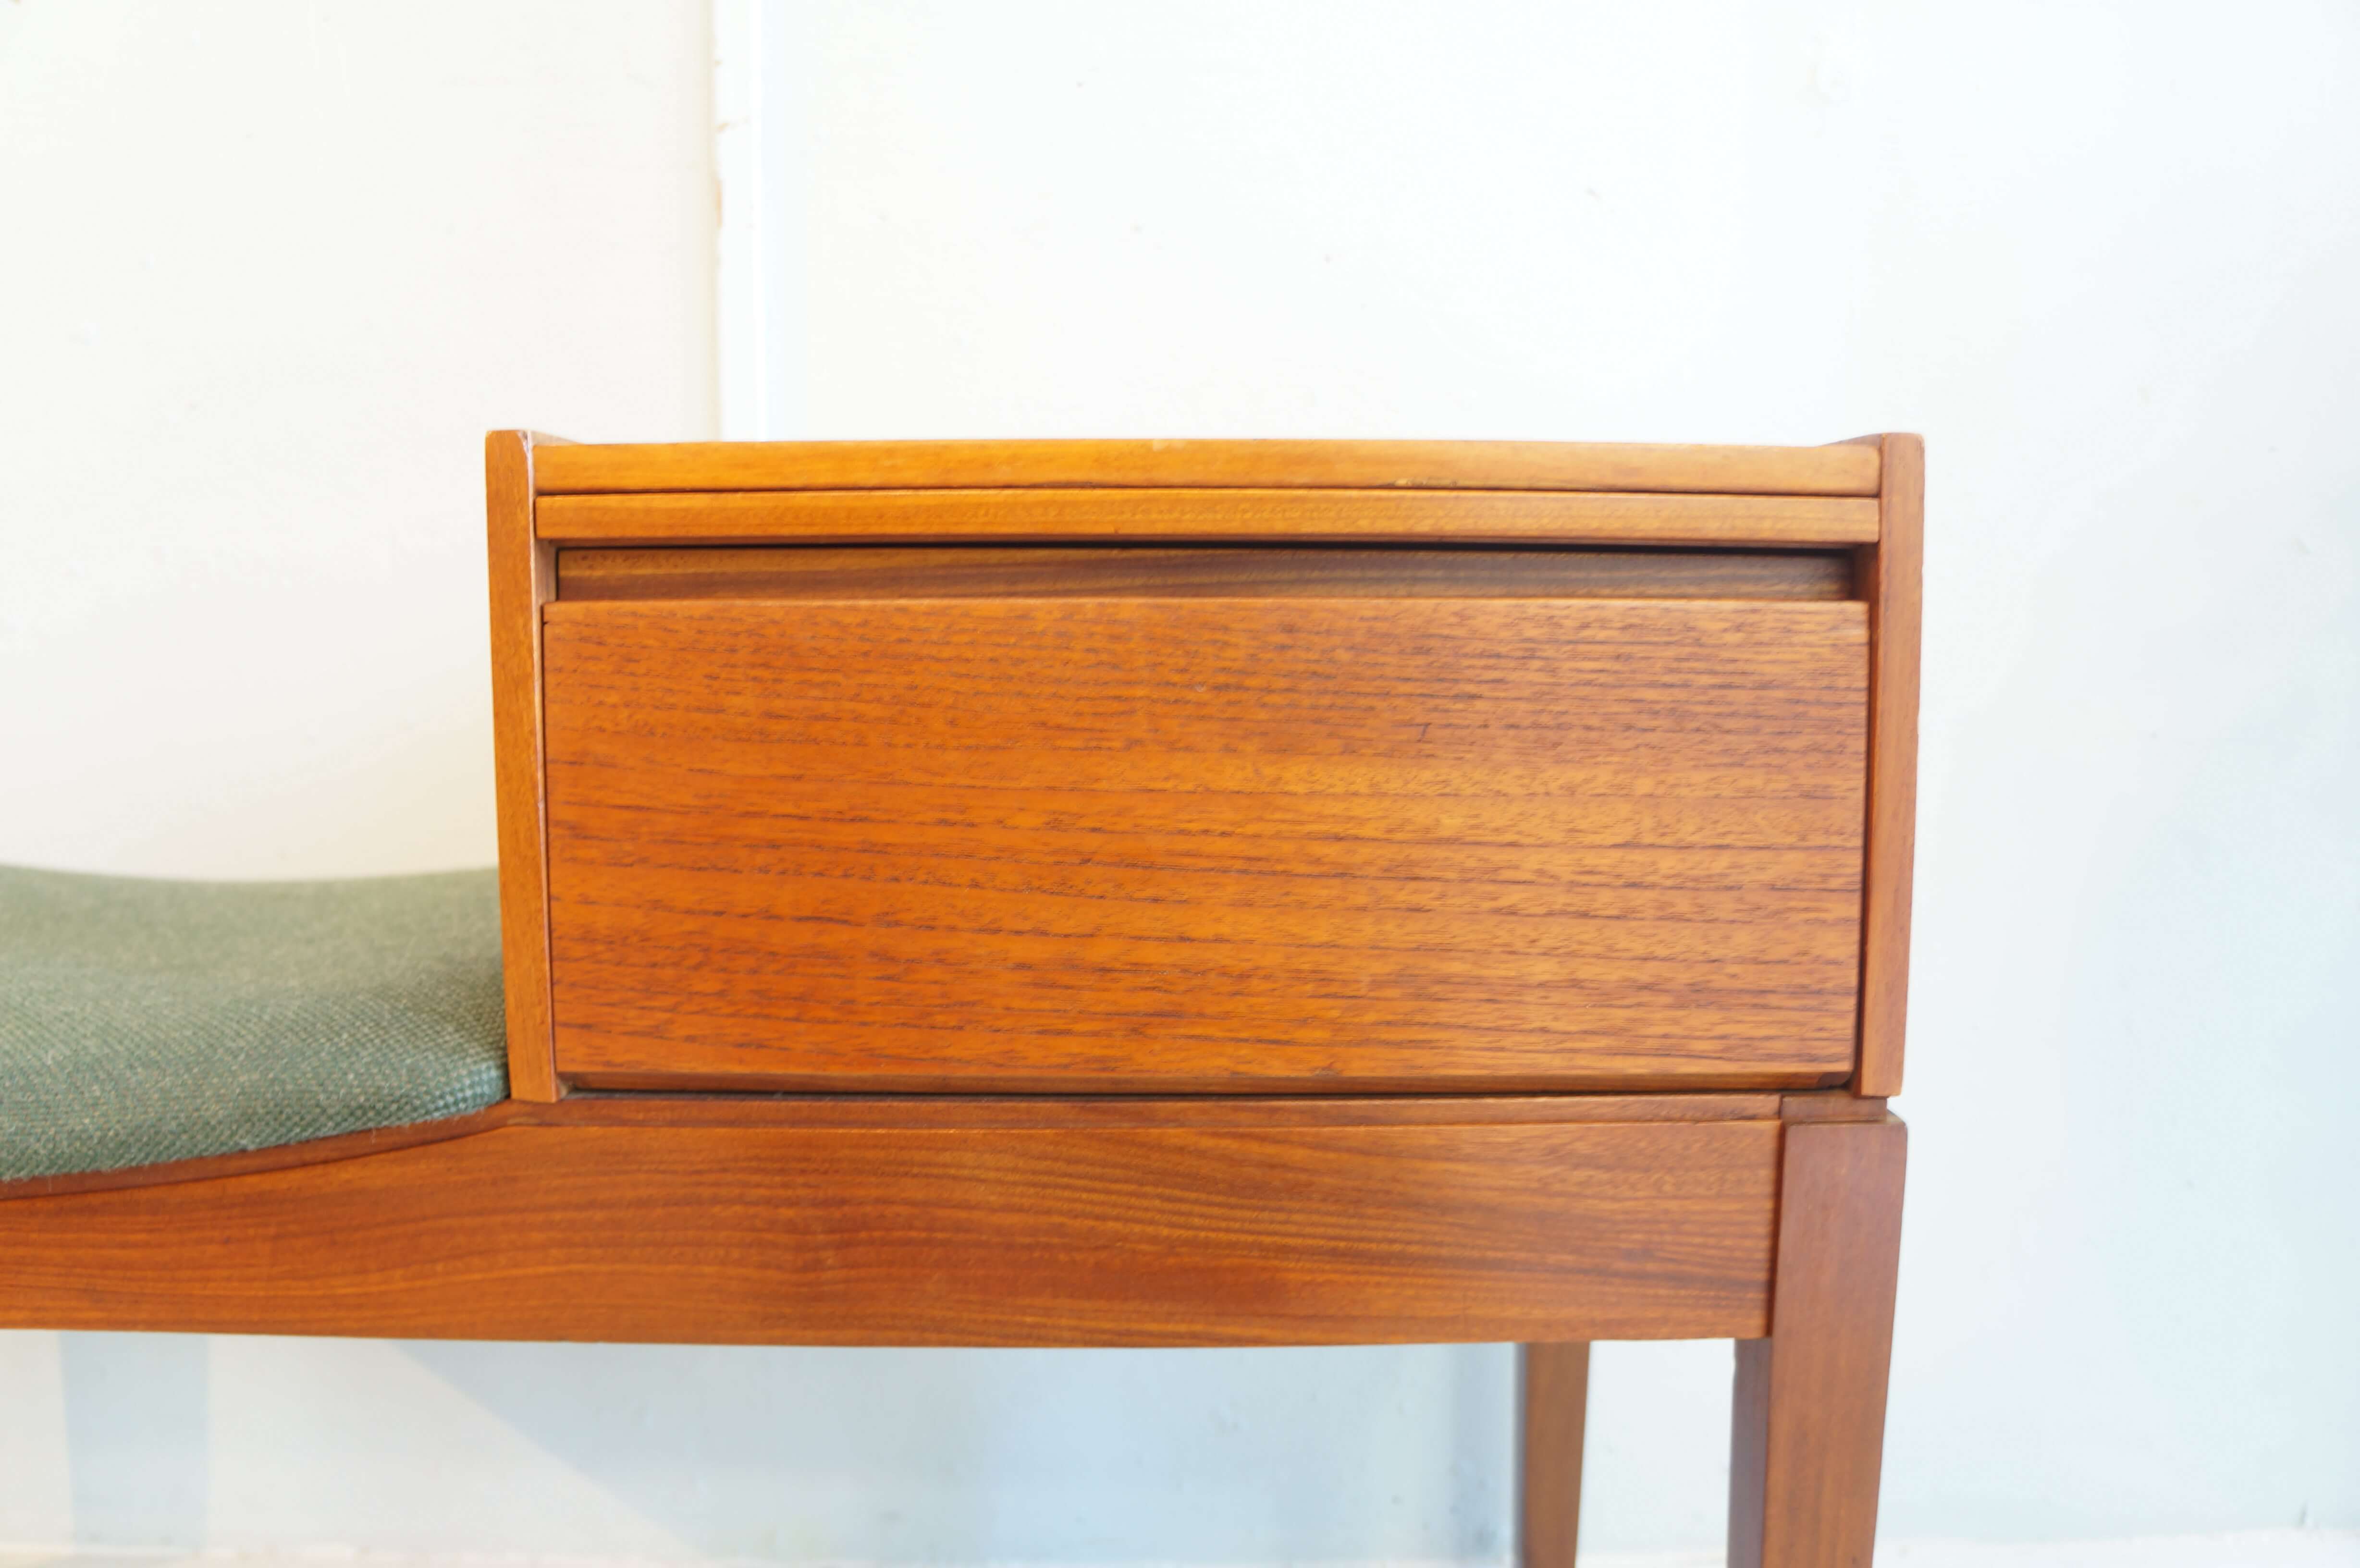 UK VINTAGE ERCOL TEAK WOOD TELEPHONE TABLE MADE by CHIPPY / イギリス ヴィンテージ アーコール チーク材 テレフォンベンチ チッピー社製造